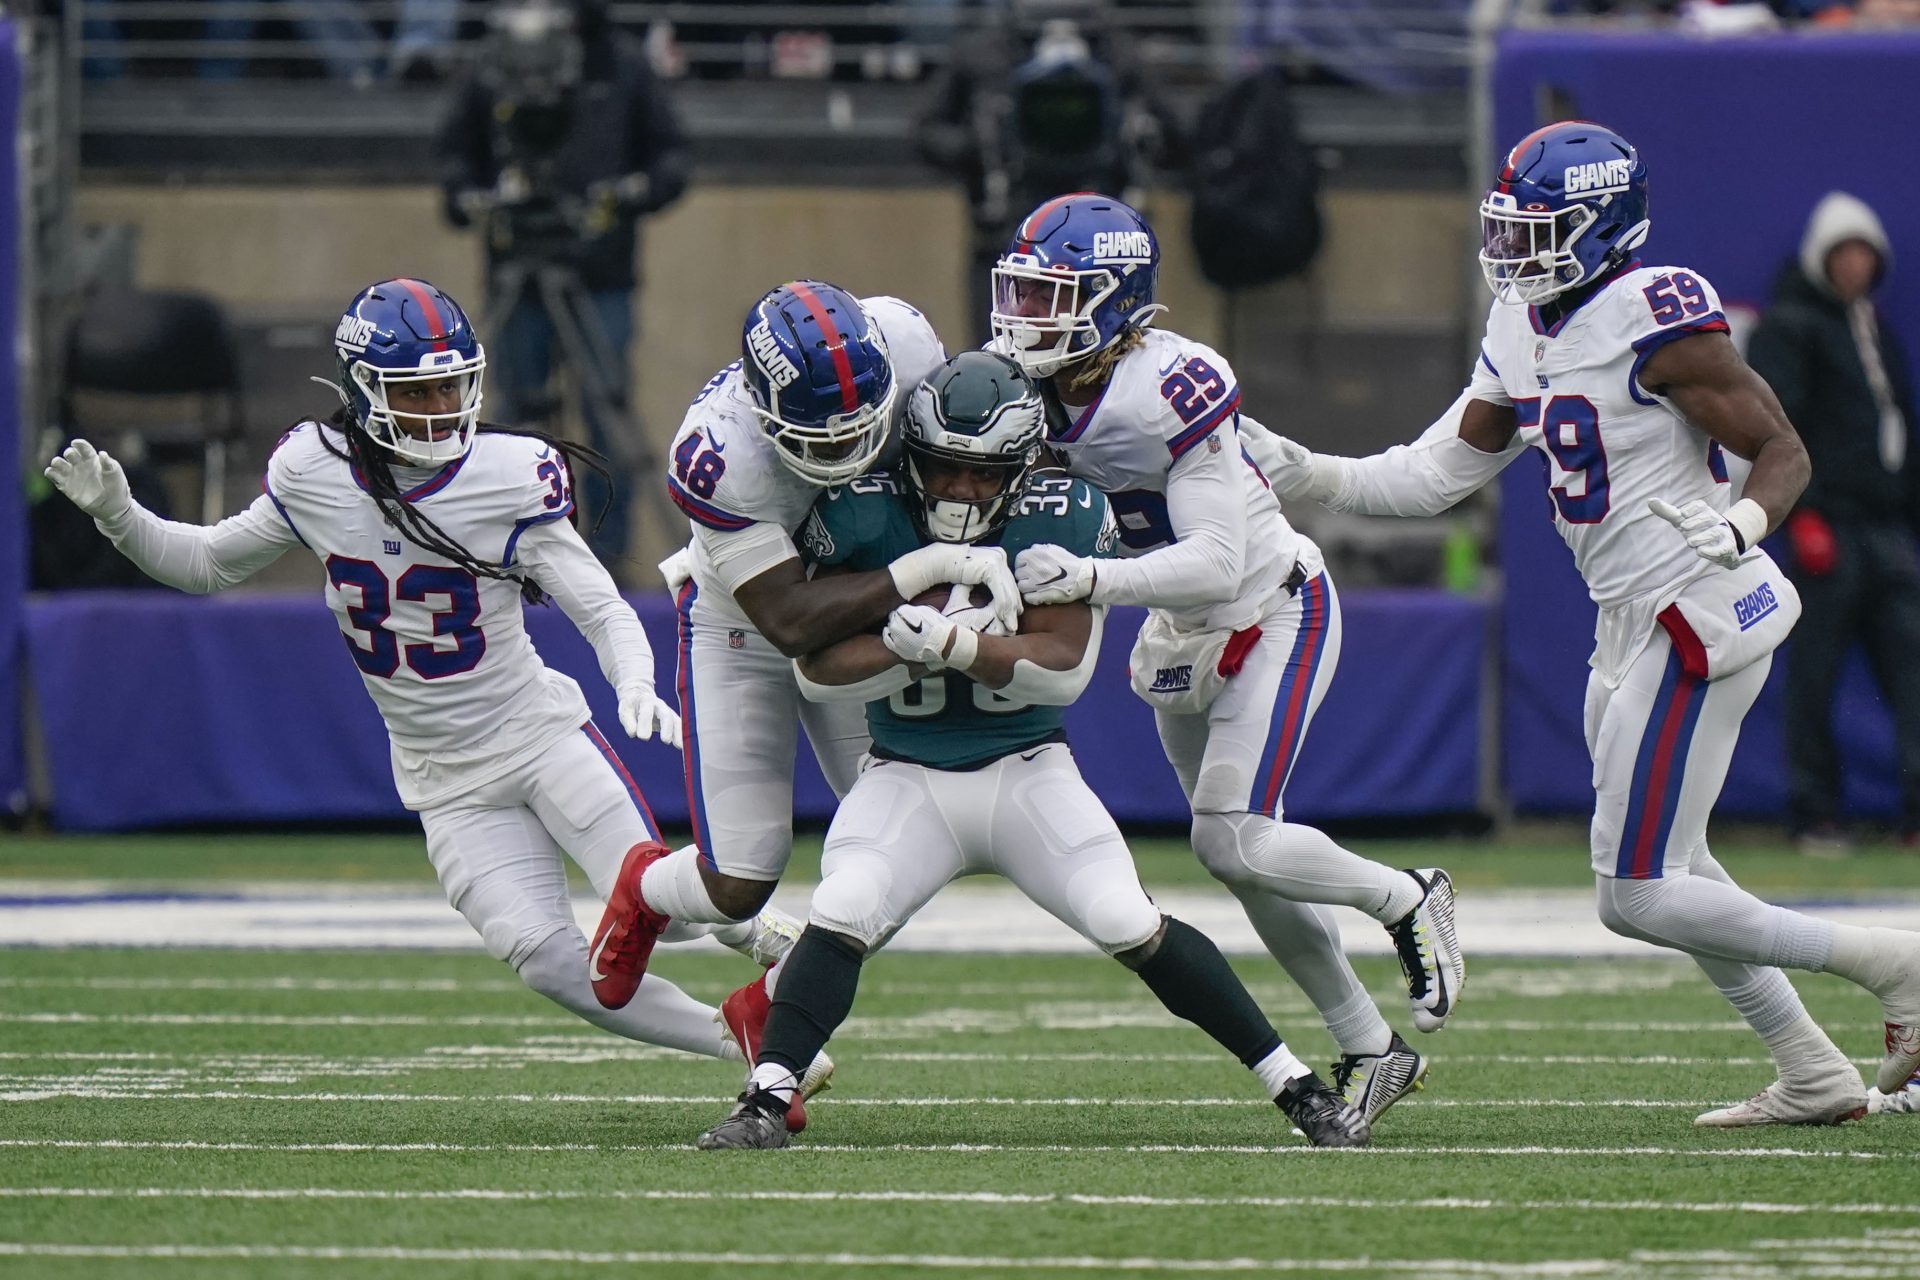 New York Giants defenders tackle Philadelphia Eagles' Boston Scott, center, during the first half of an NFL football game, Sunday, Nov. 28, 2021, in East Rutherford, N.J.